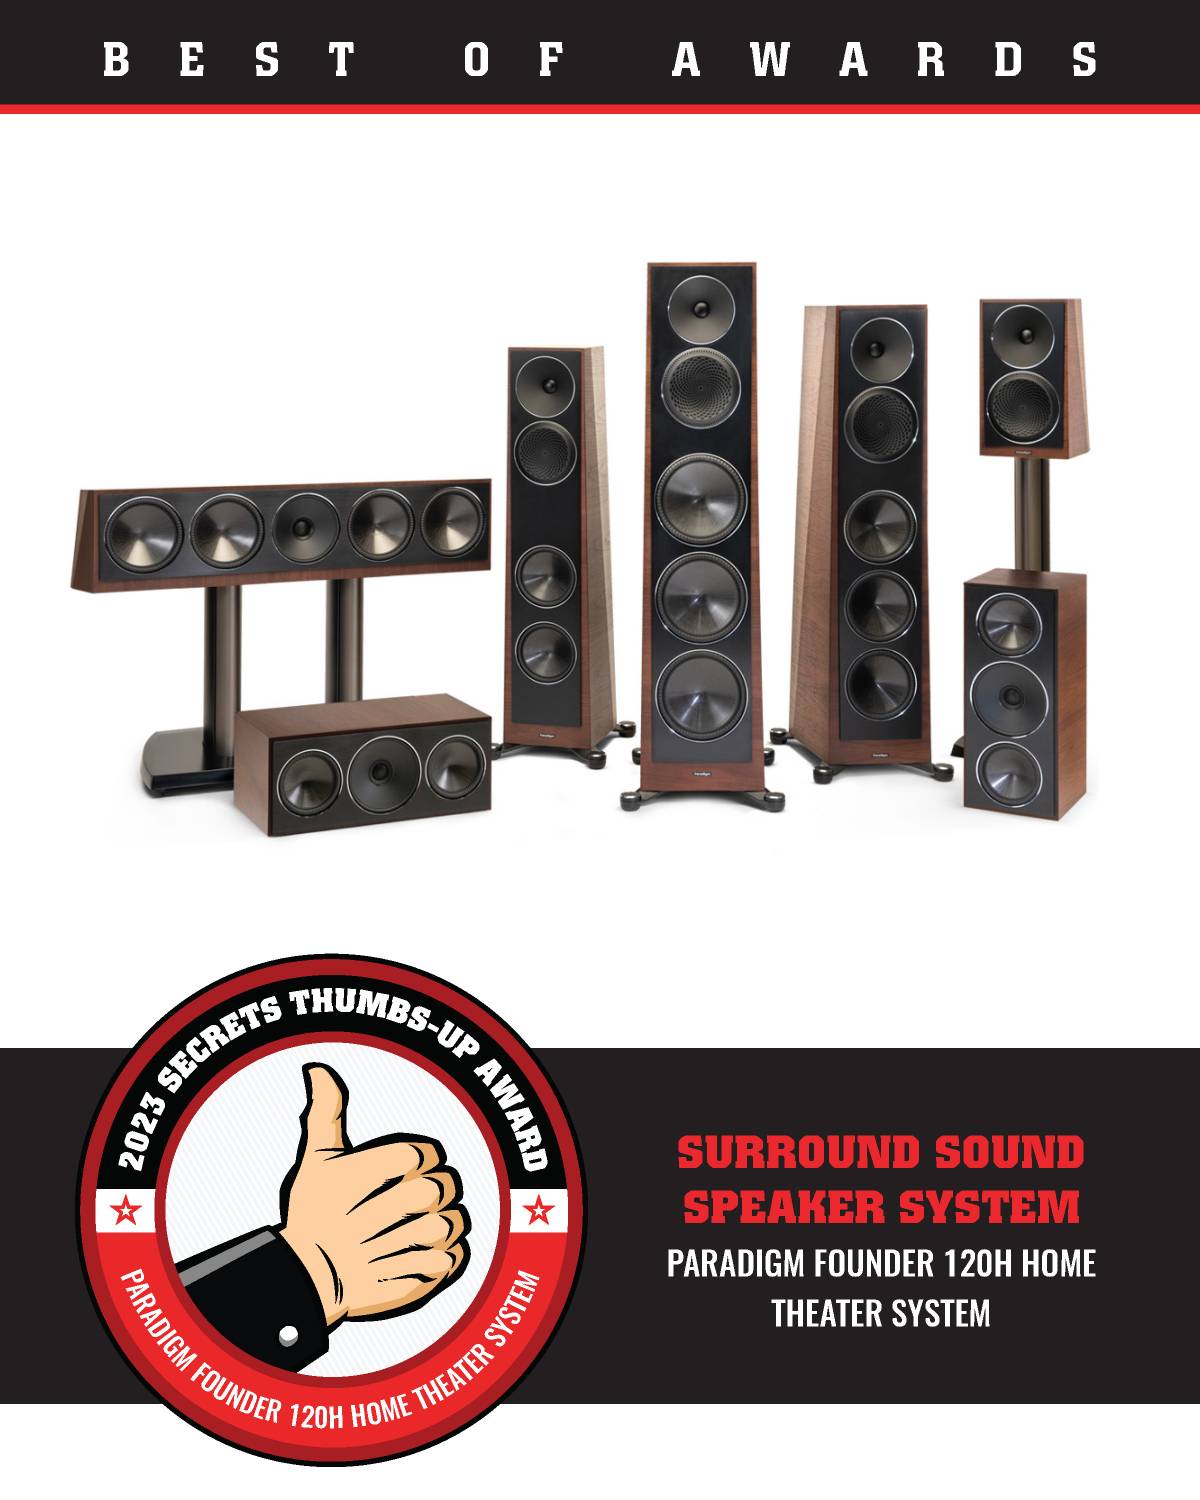 Paradigm Founder 120H Home Theater System